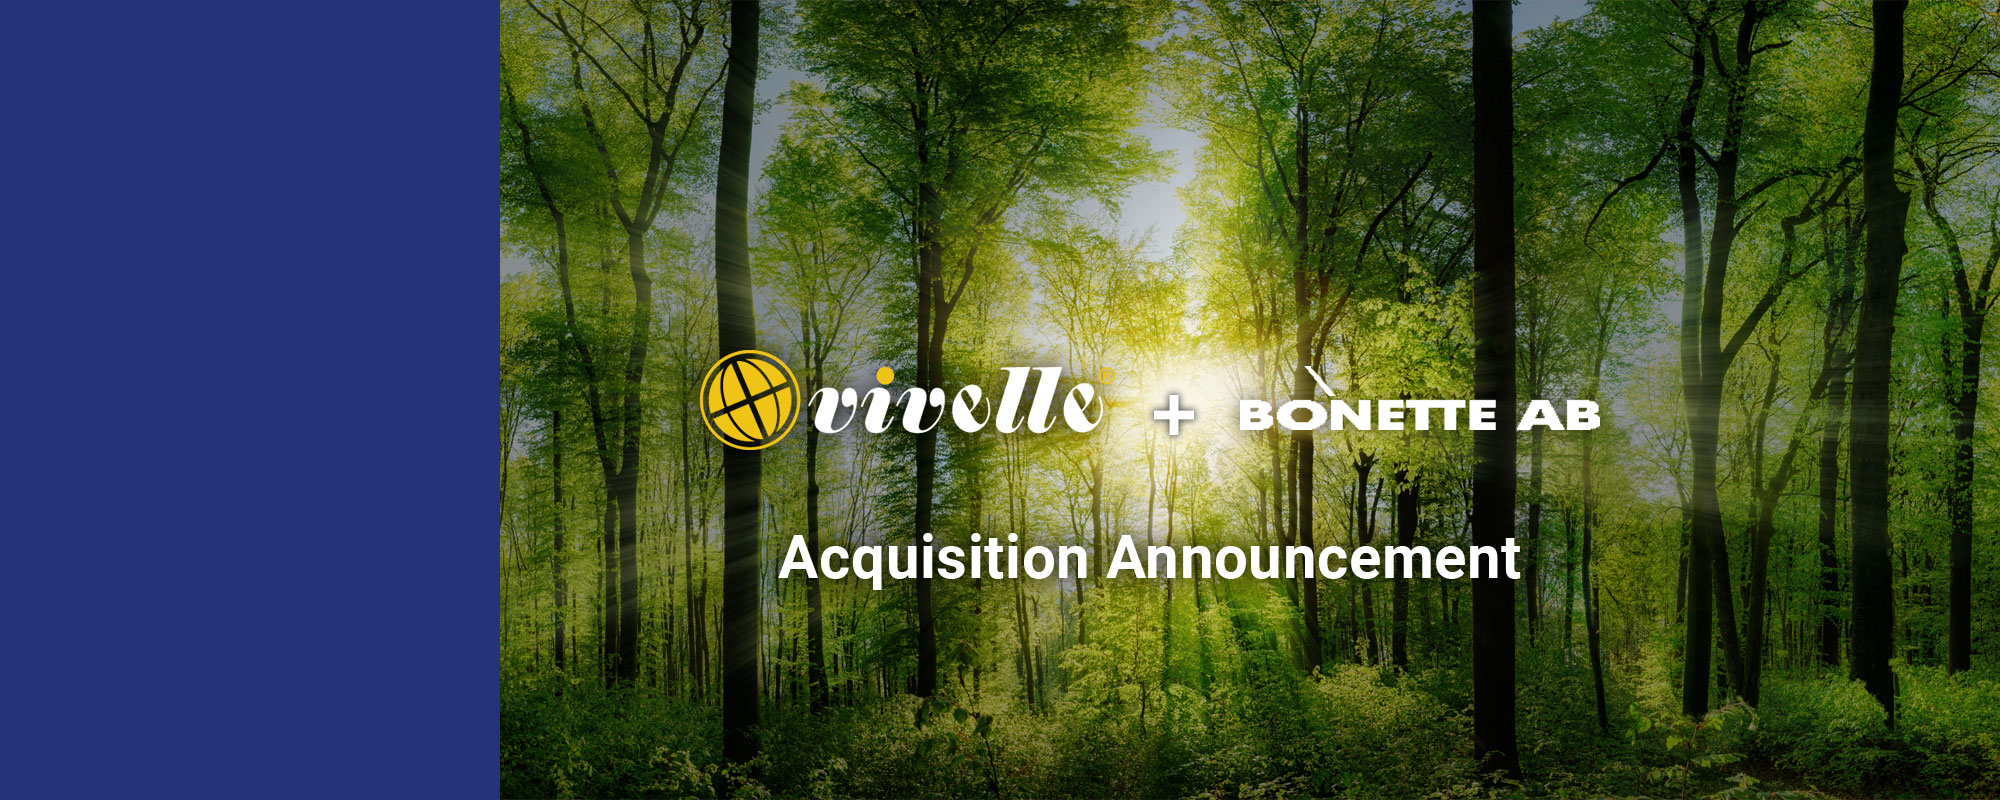 We are pleased to announce our new acquisition